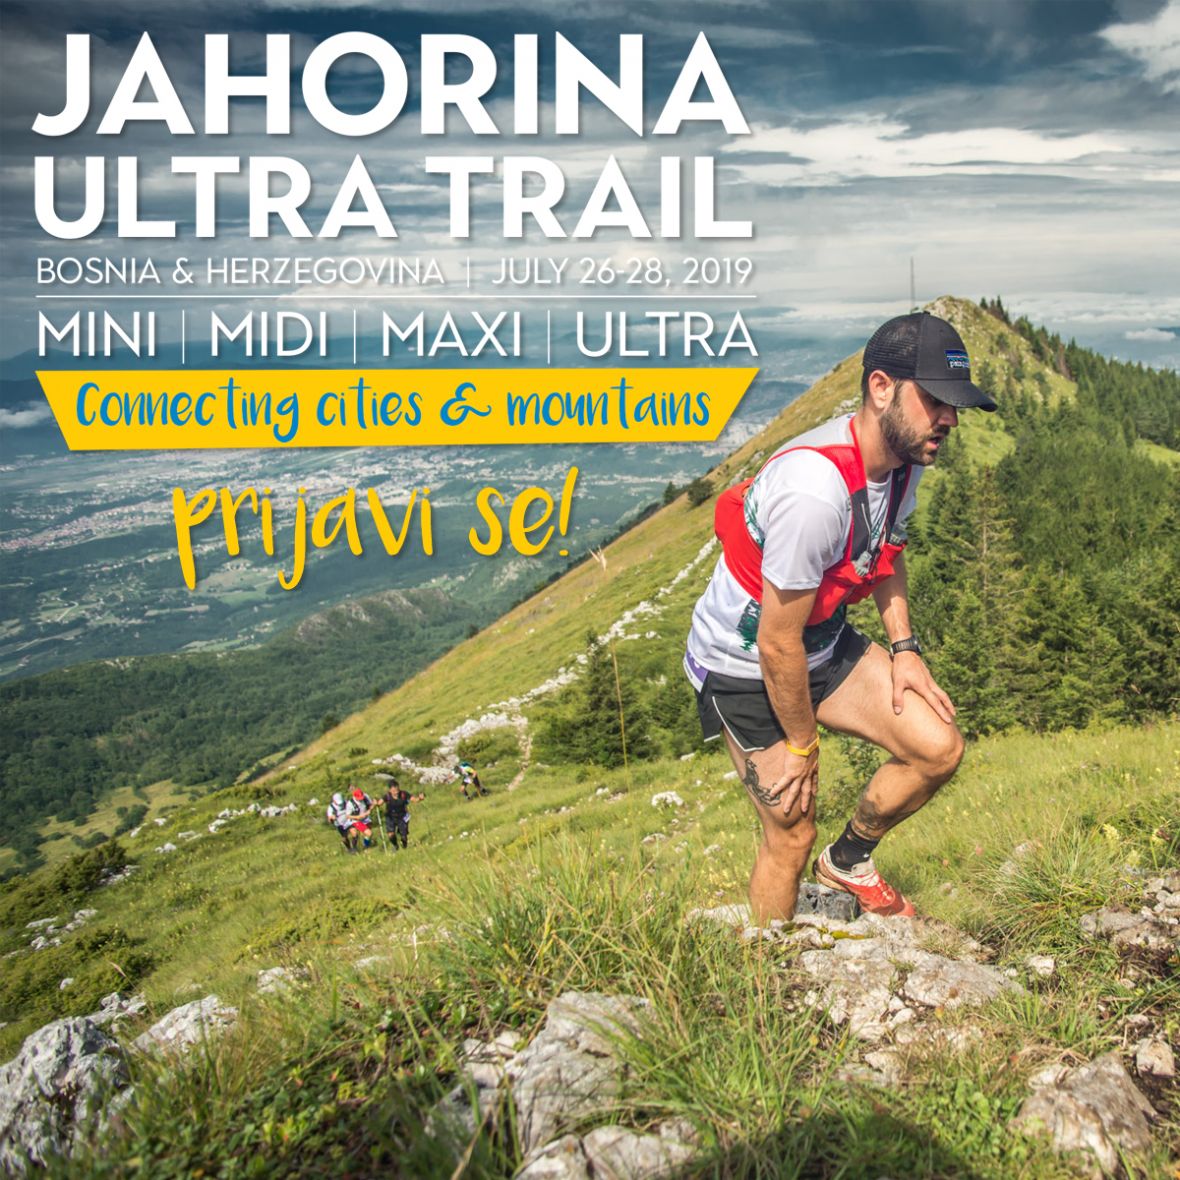 Jahorina Ultra Trail  - undefined